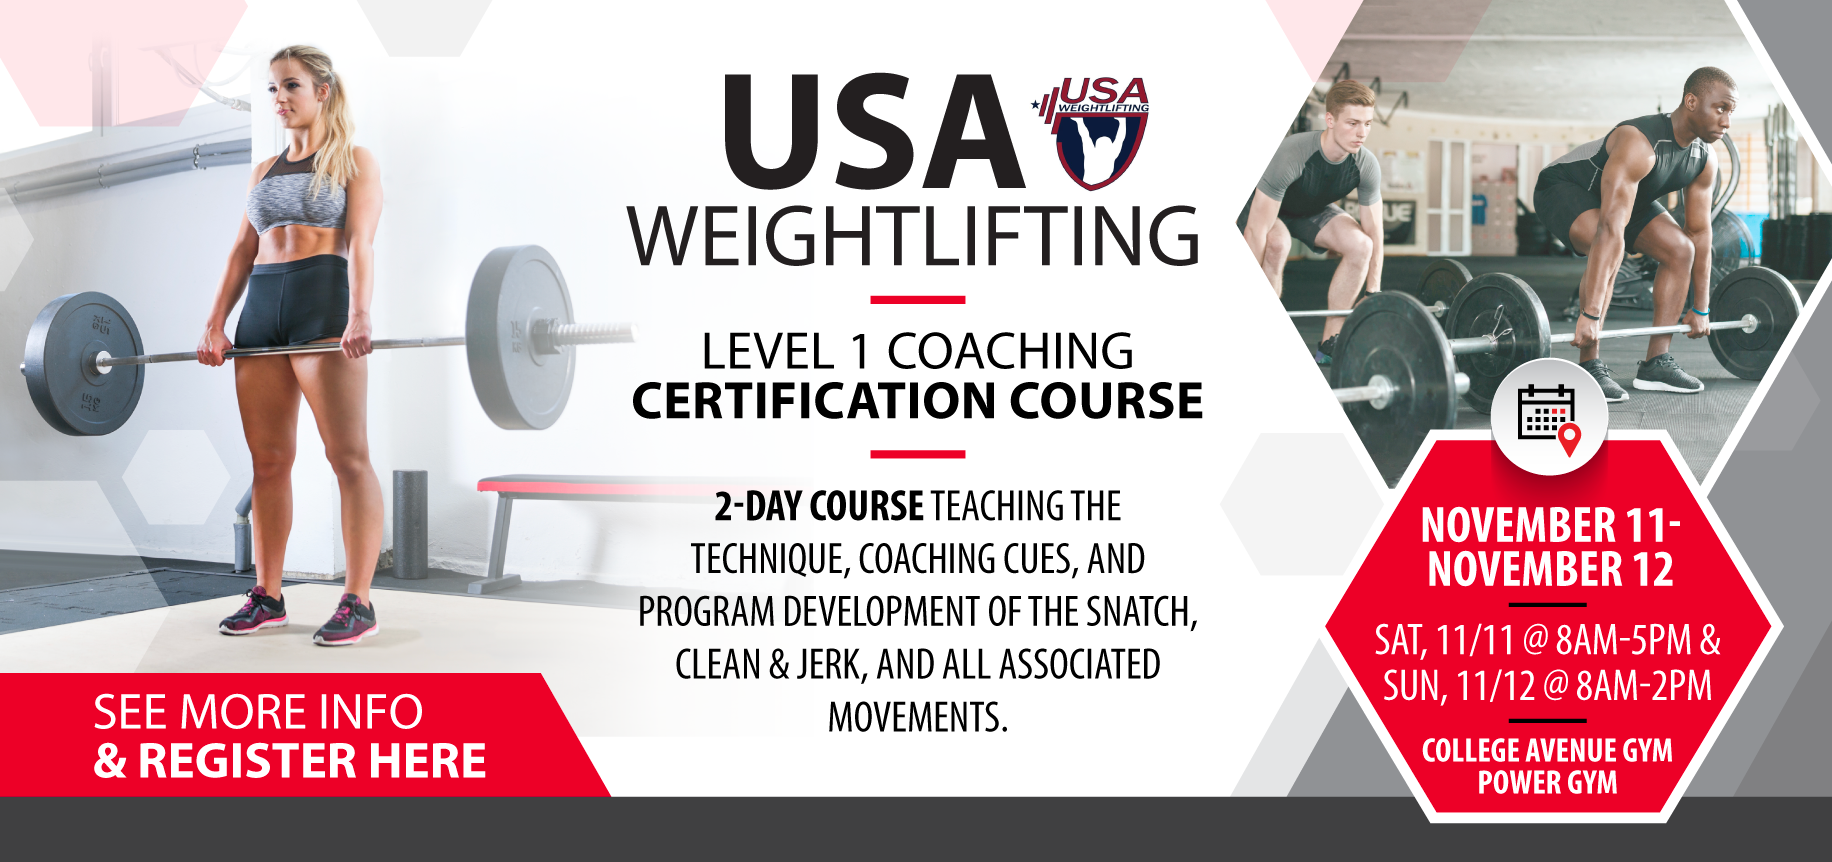 Rec_USA-Weightlifting-Certification-Course_Web-Banner_F23